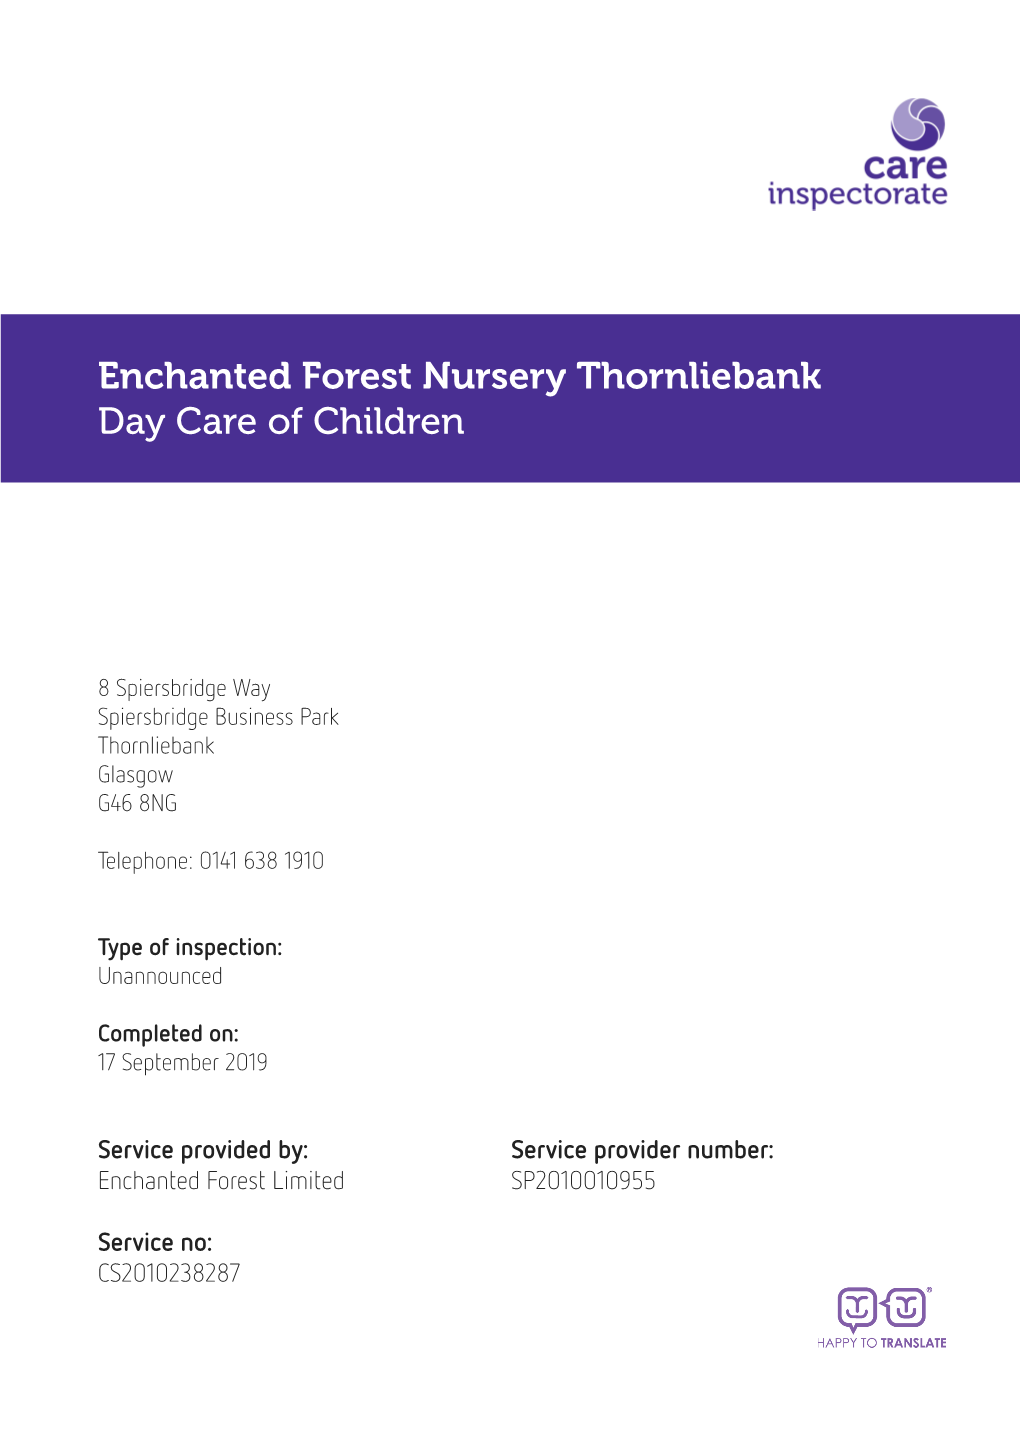 Enchanted Forest Nursery Thornliebank Day Care of Children